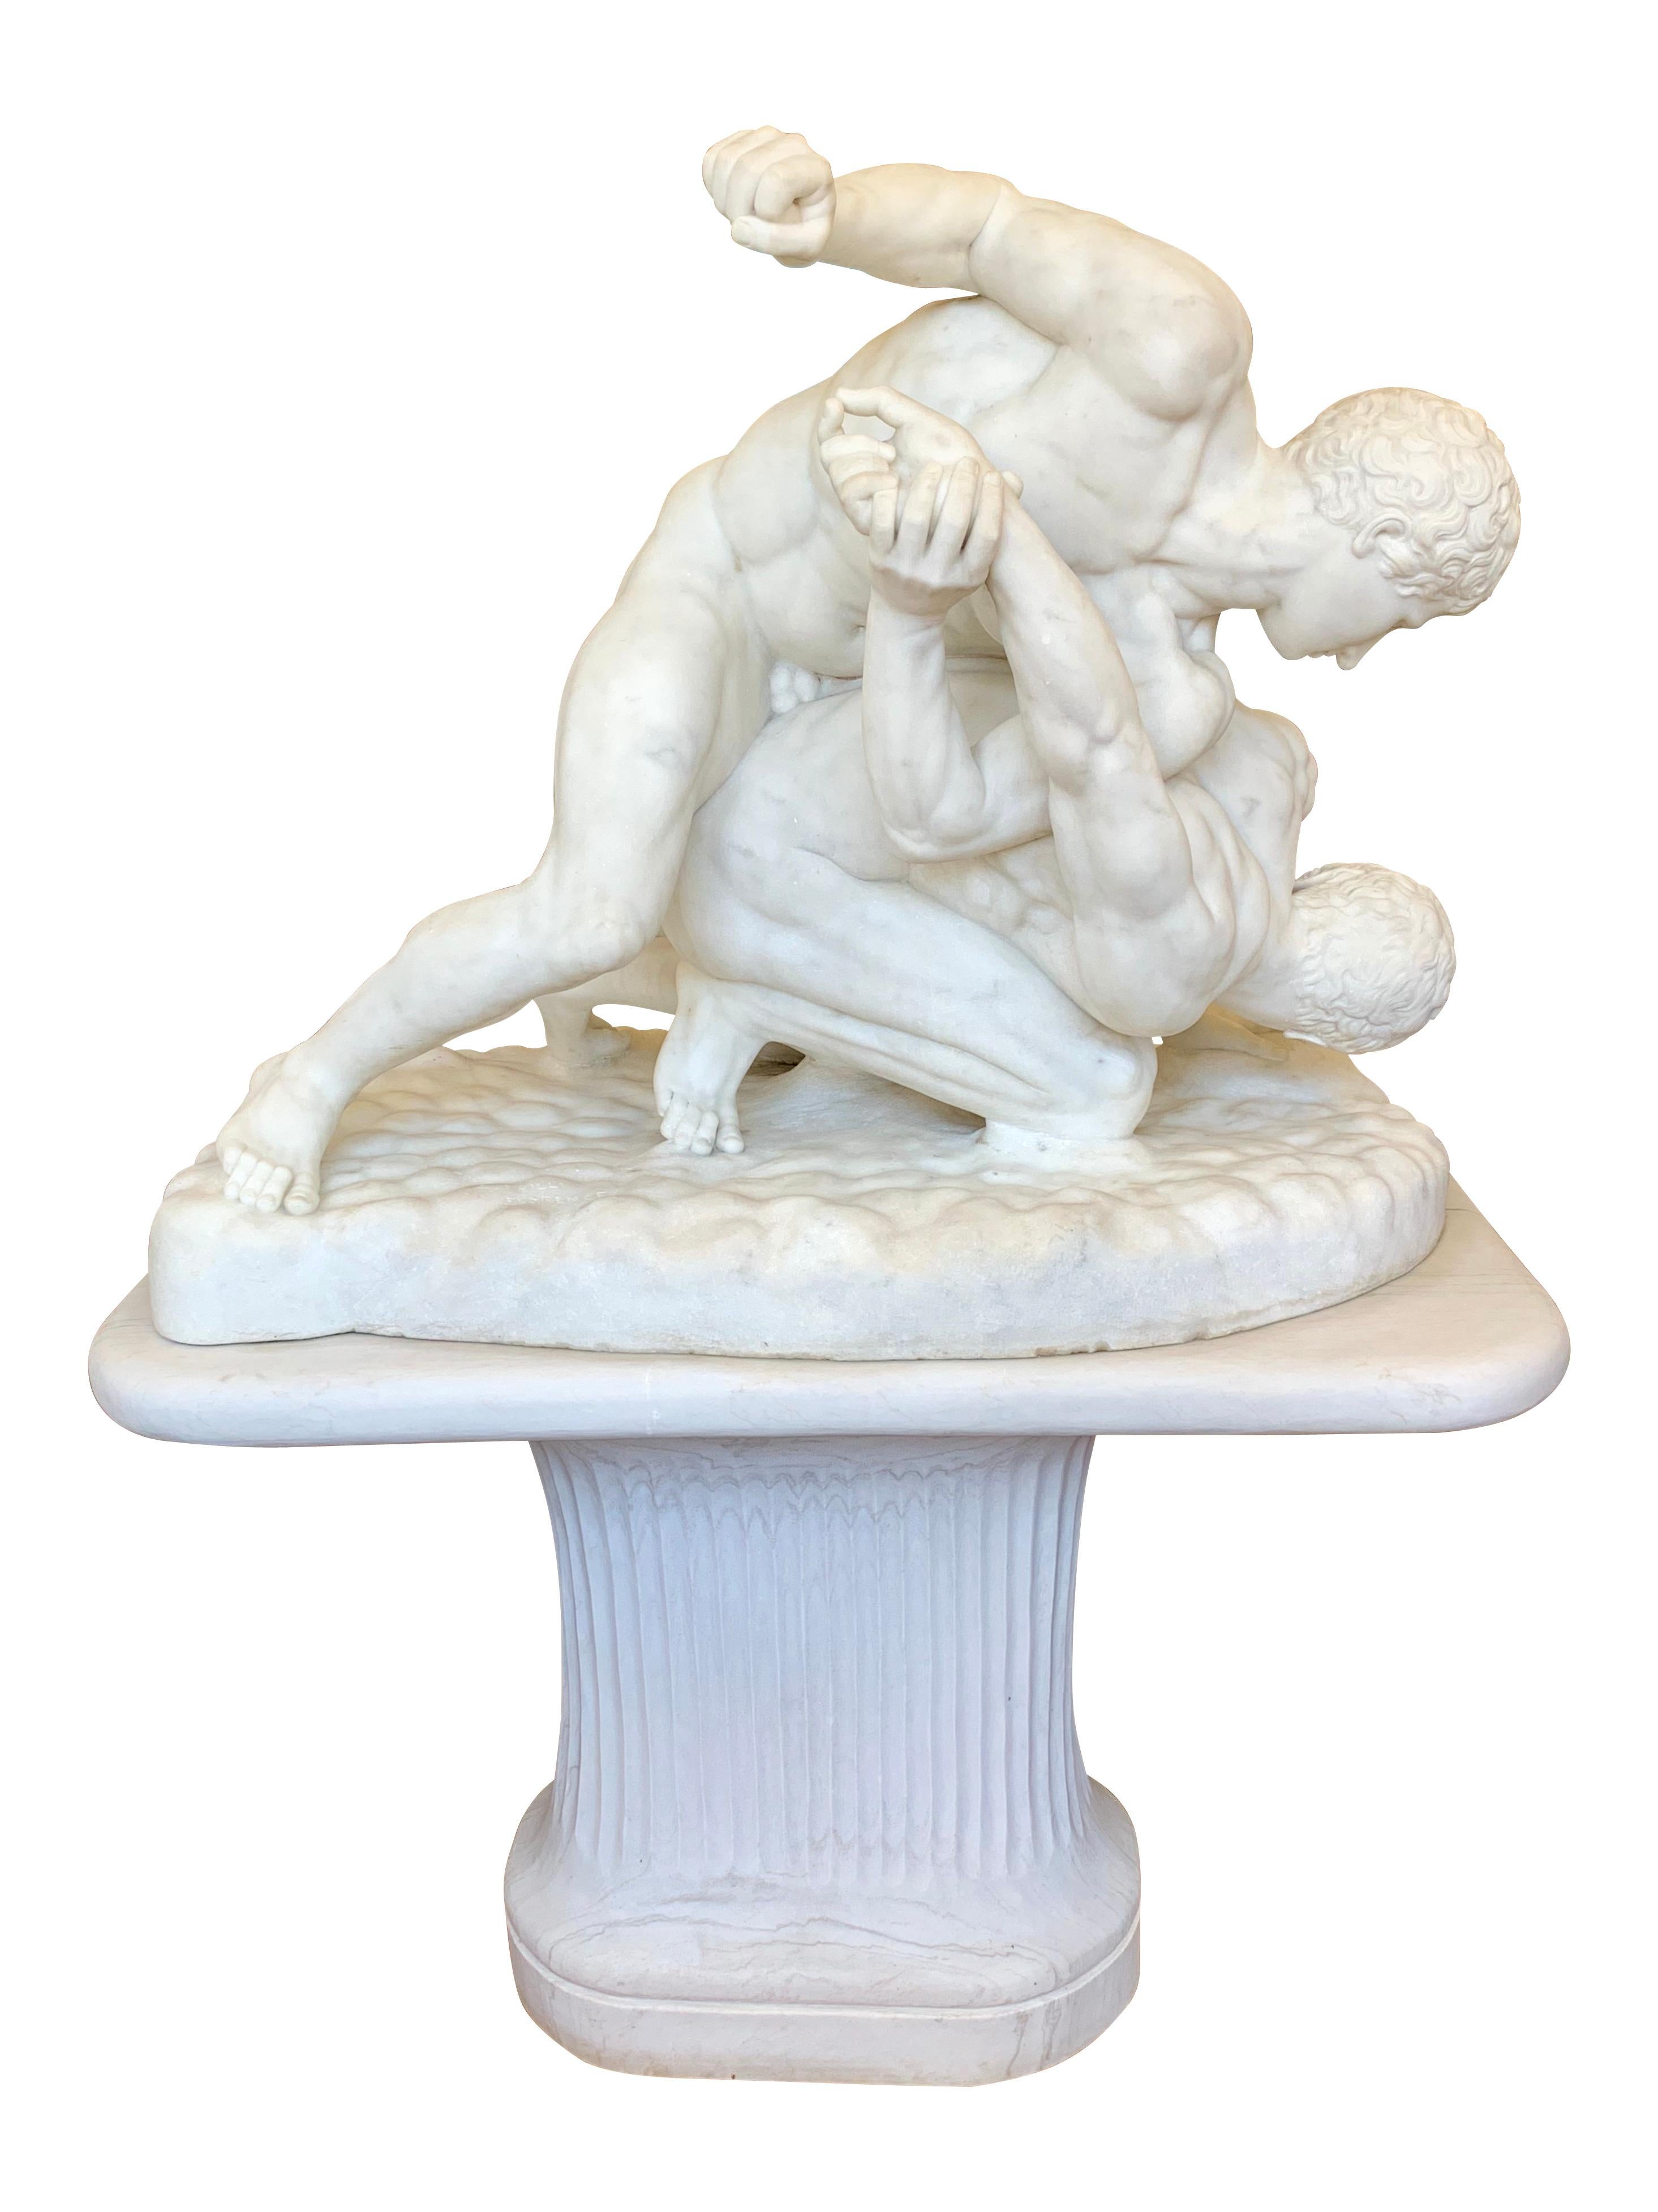 Life Size 19th Century Italian White Marble Sculpture Titled "The Wrestlers" 